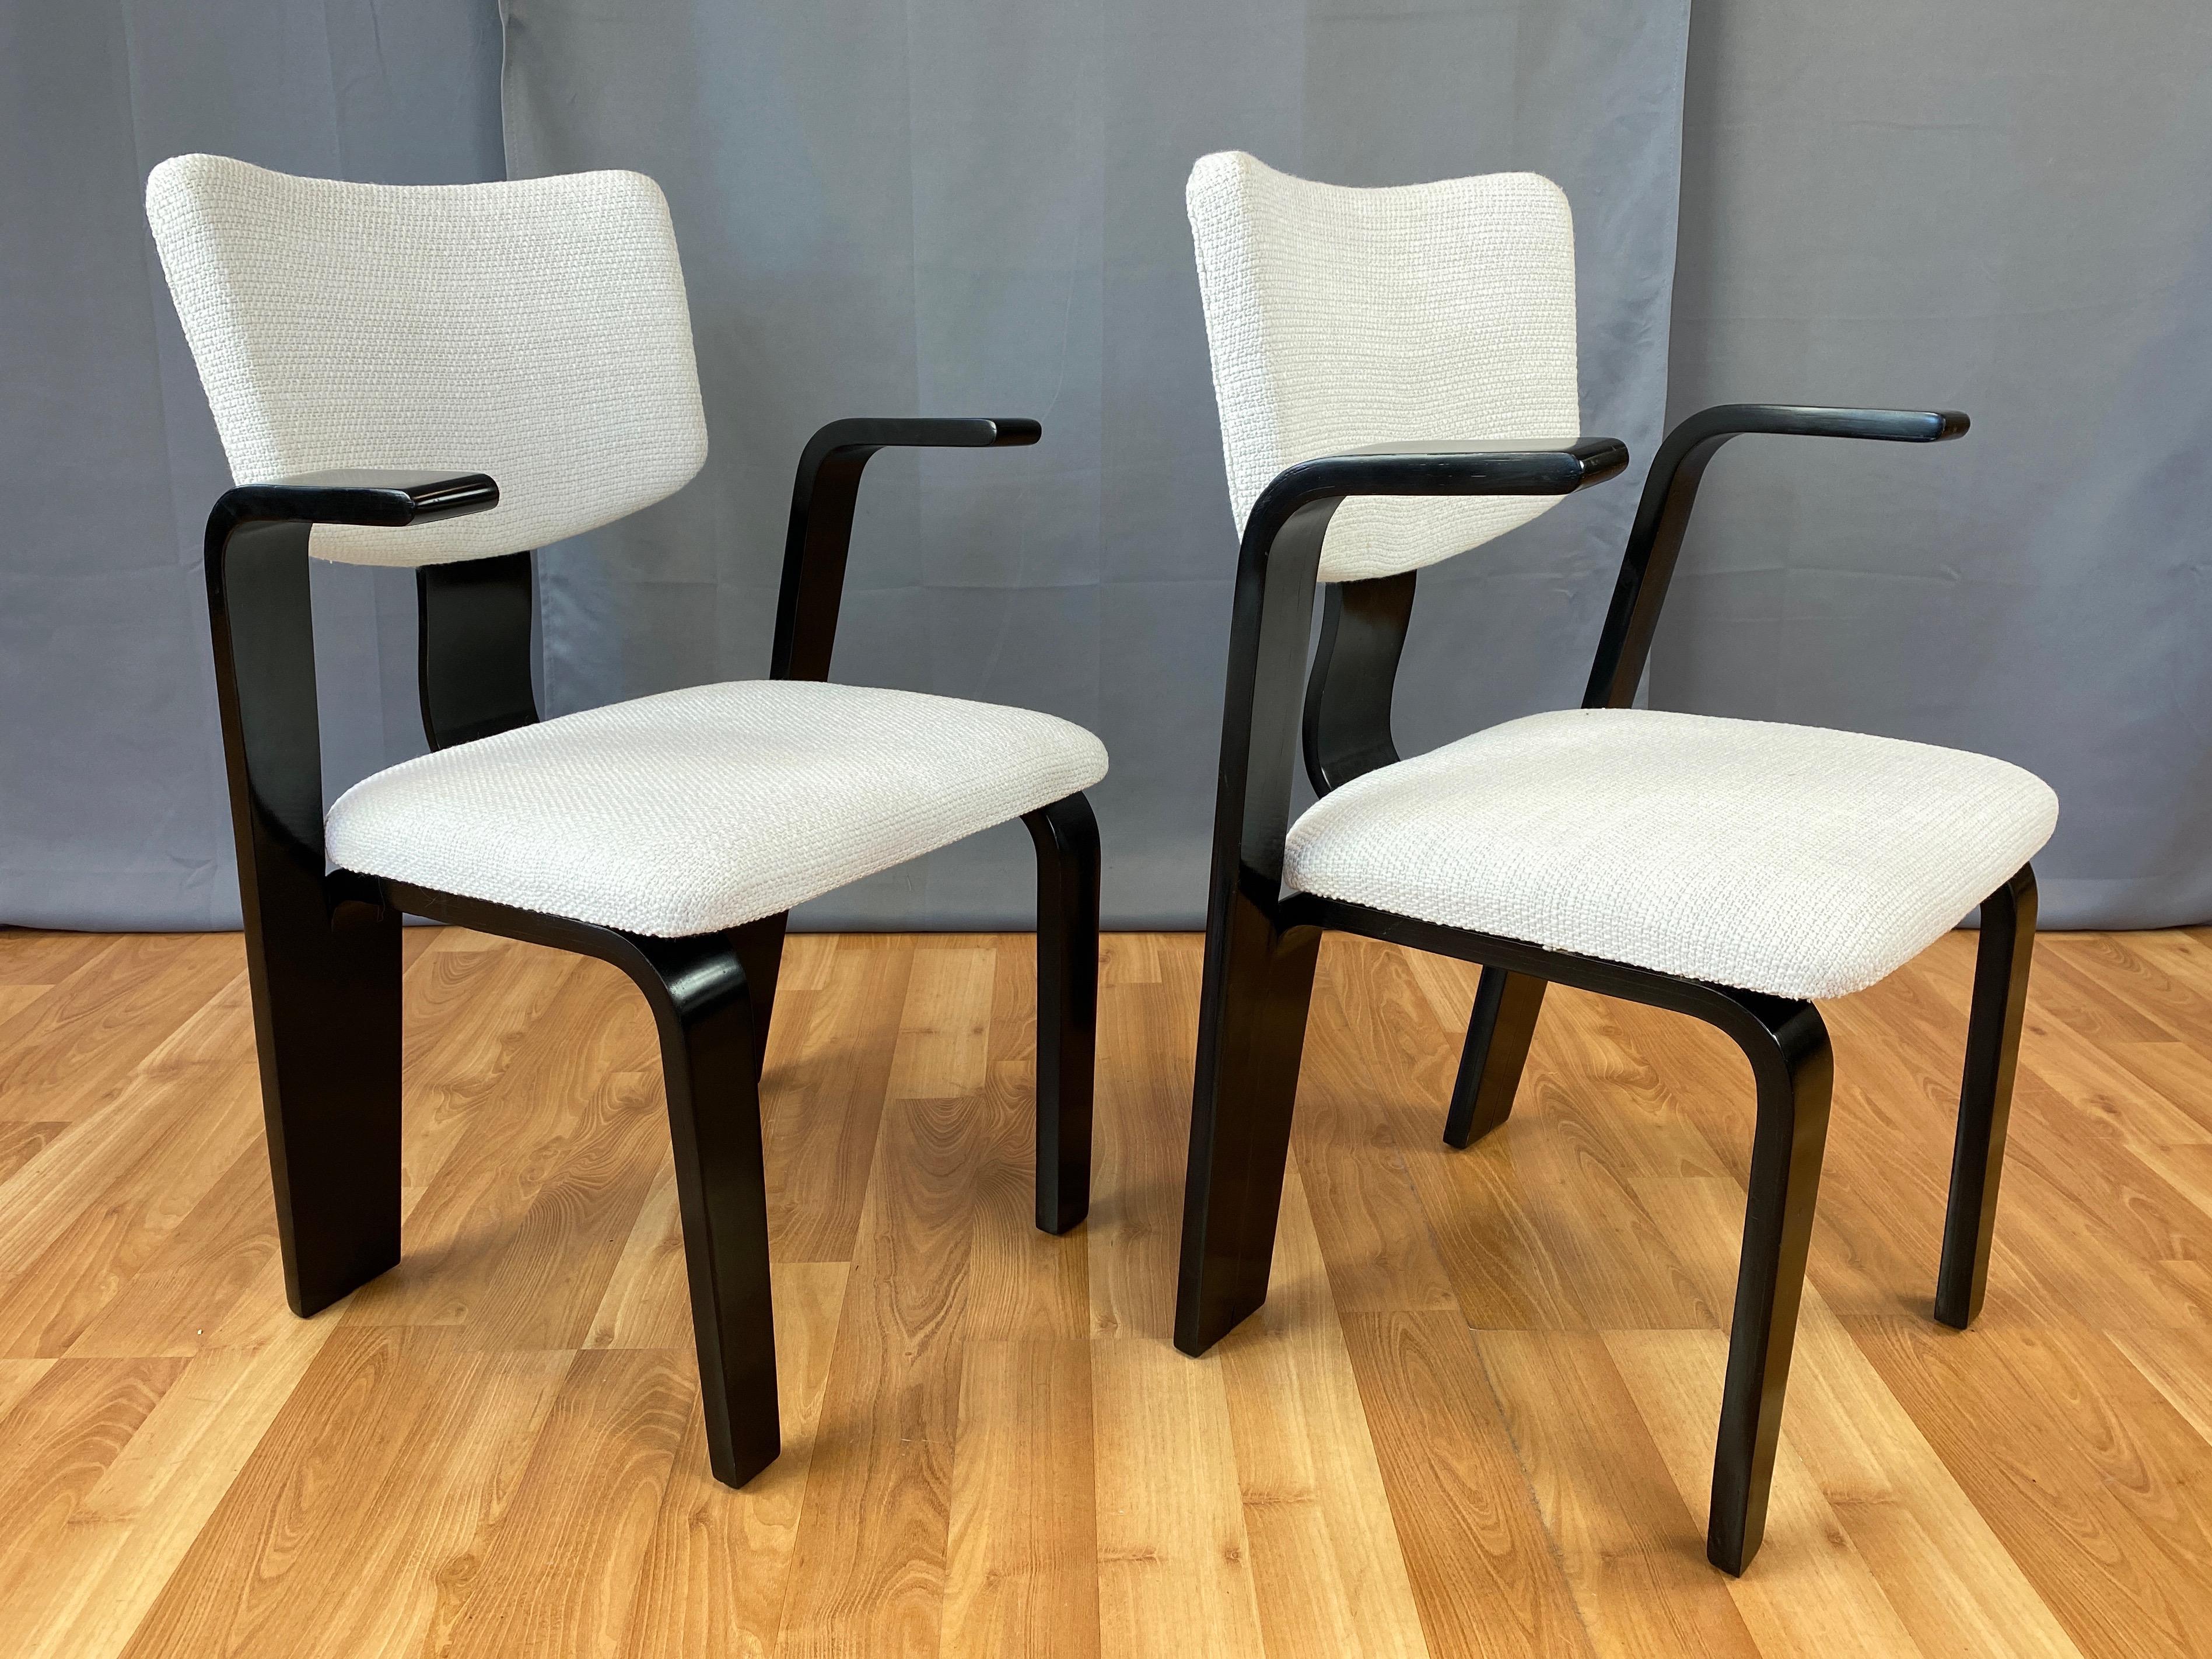 Pair of Thonet Black Lacquered Bentwood Armchairs with Upholstered Seats, 1940s For Sale 1